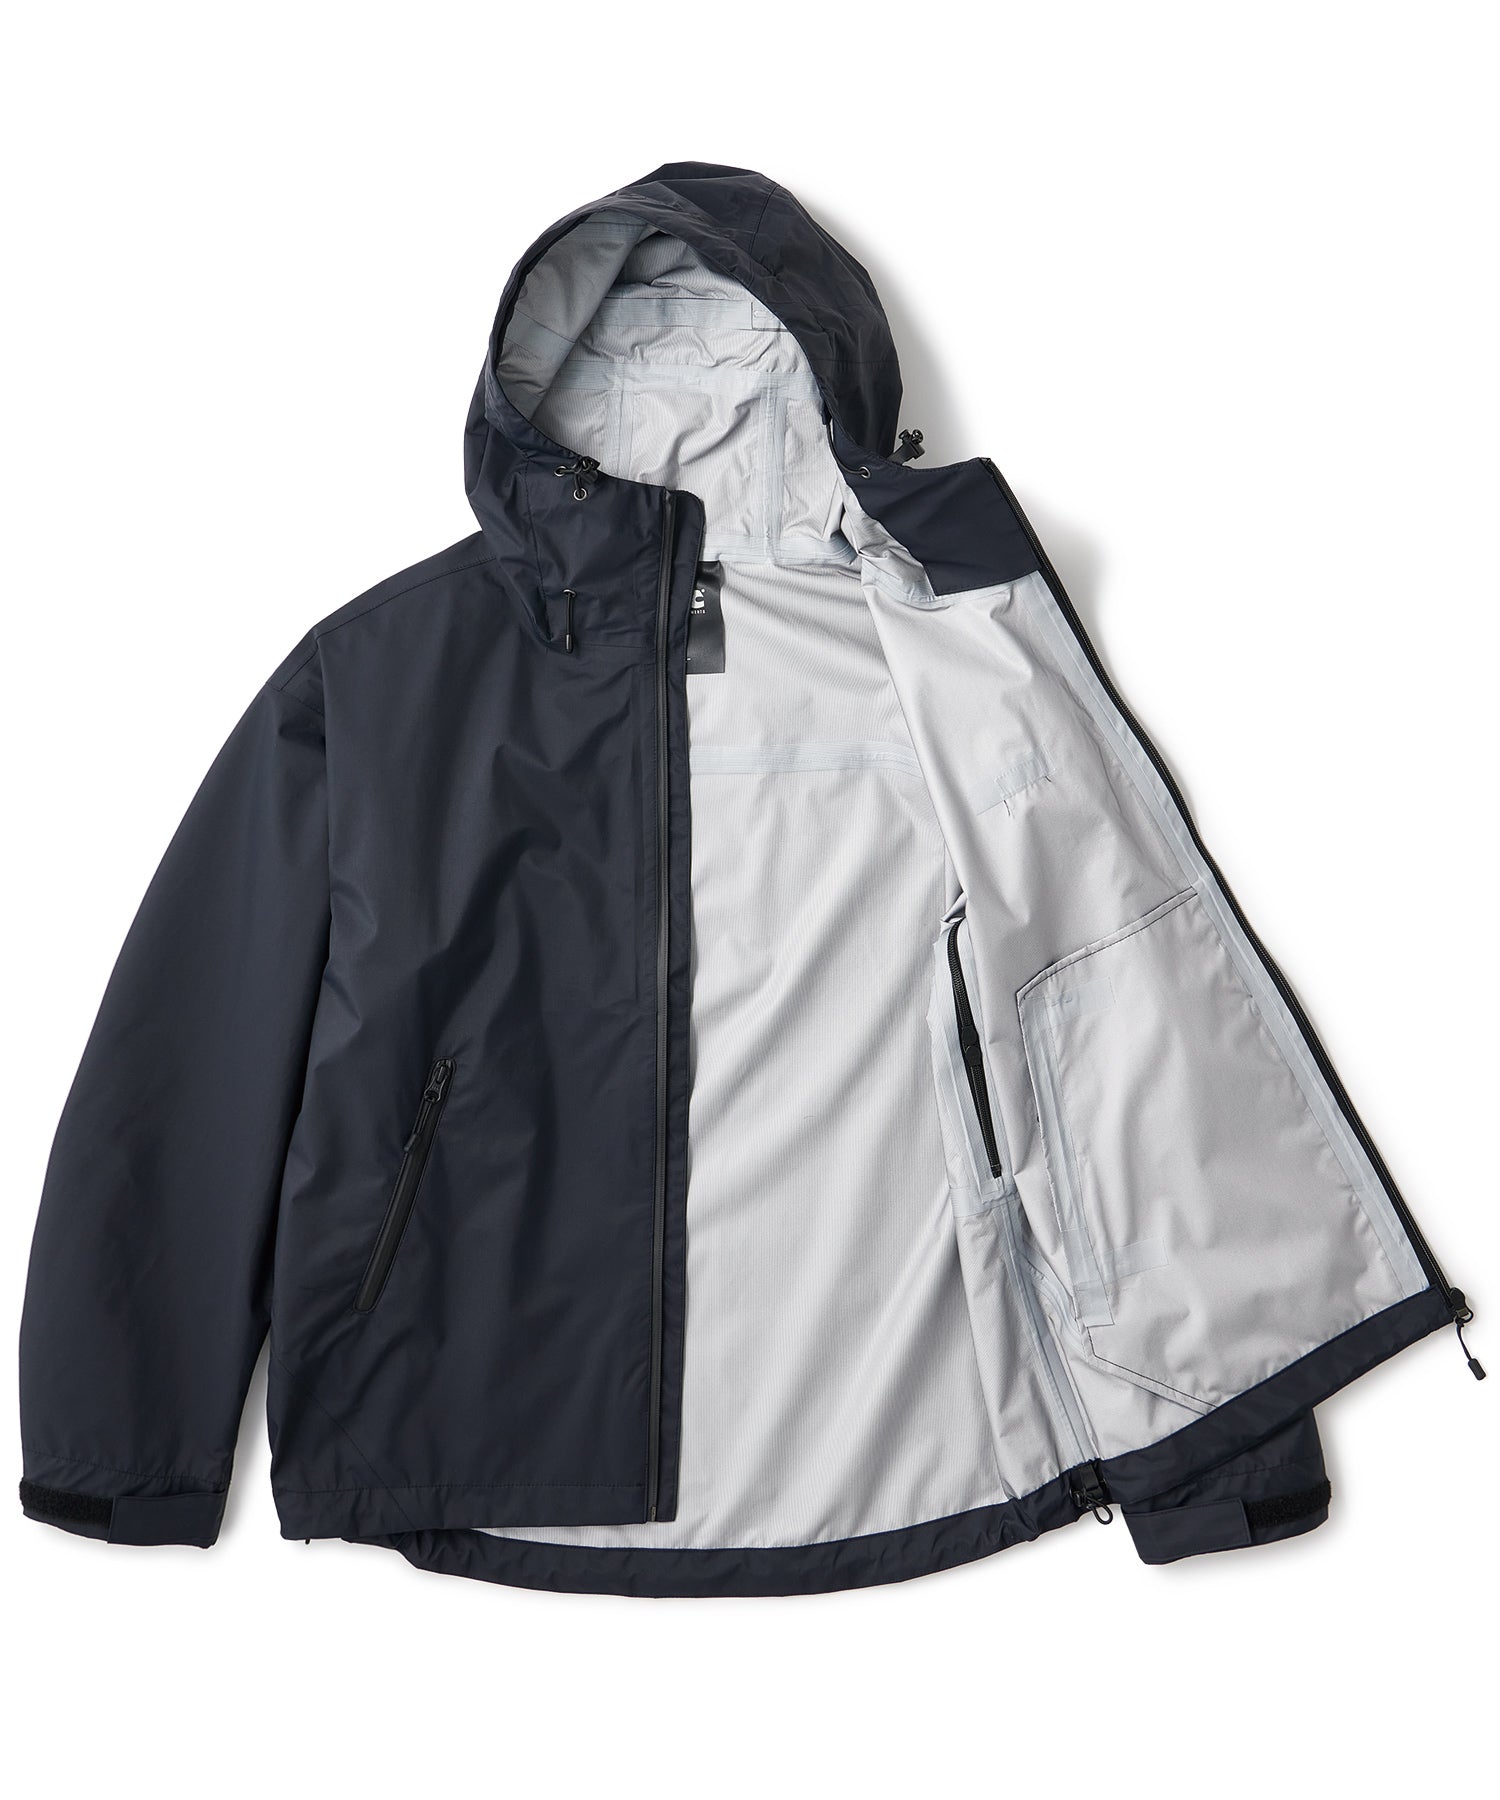 FTC 3 LAYER SHELL JACKET